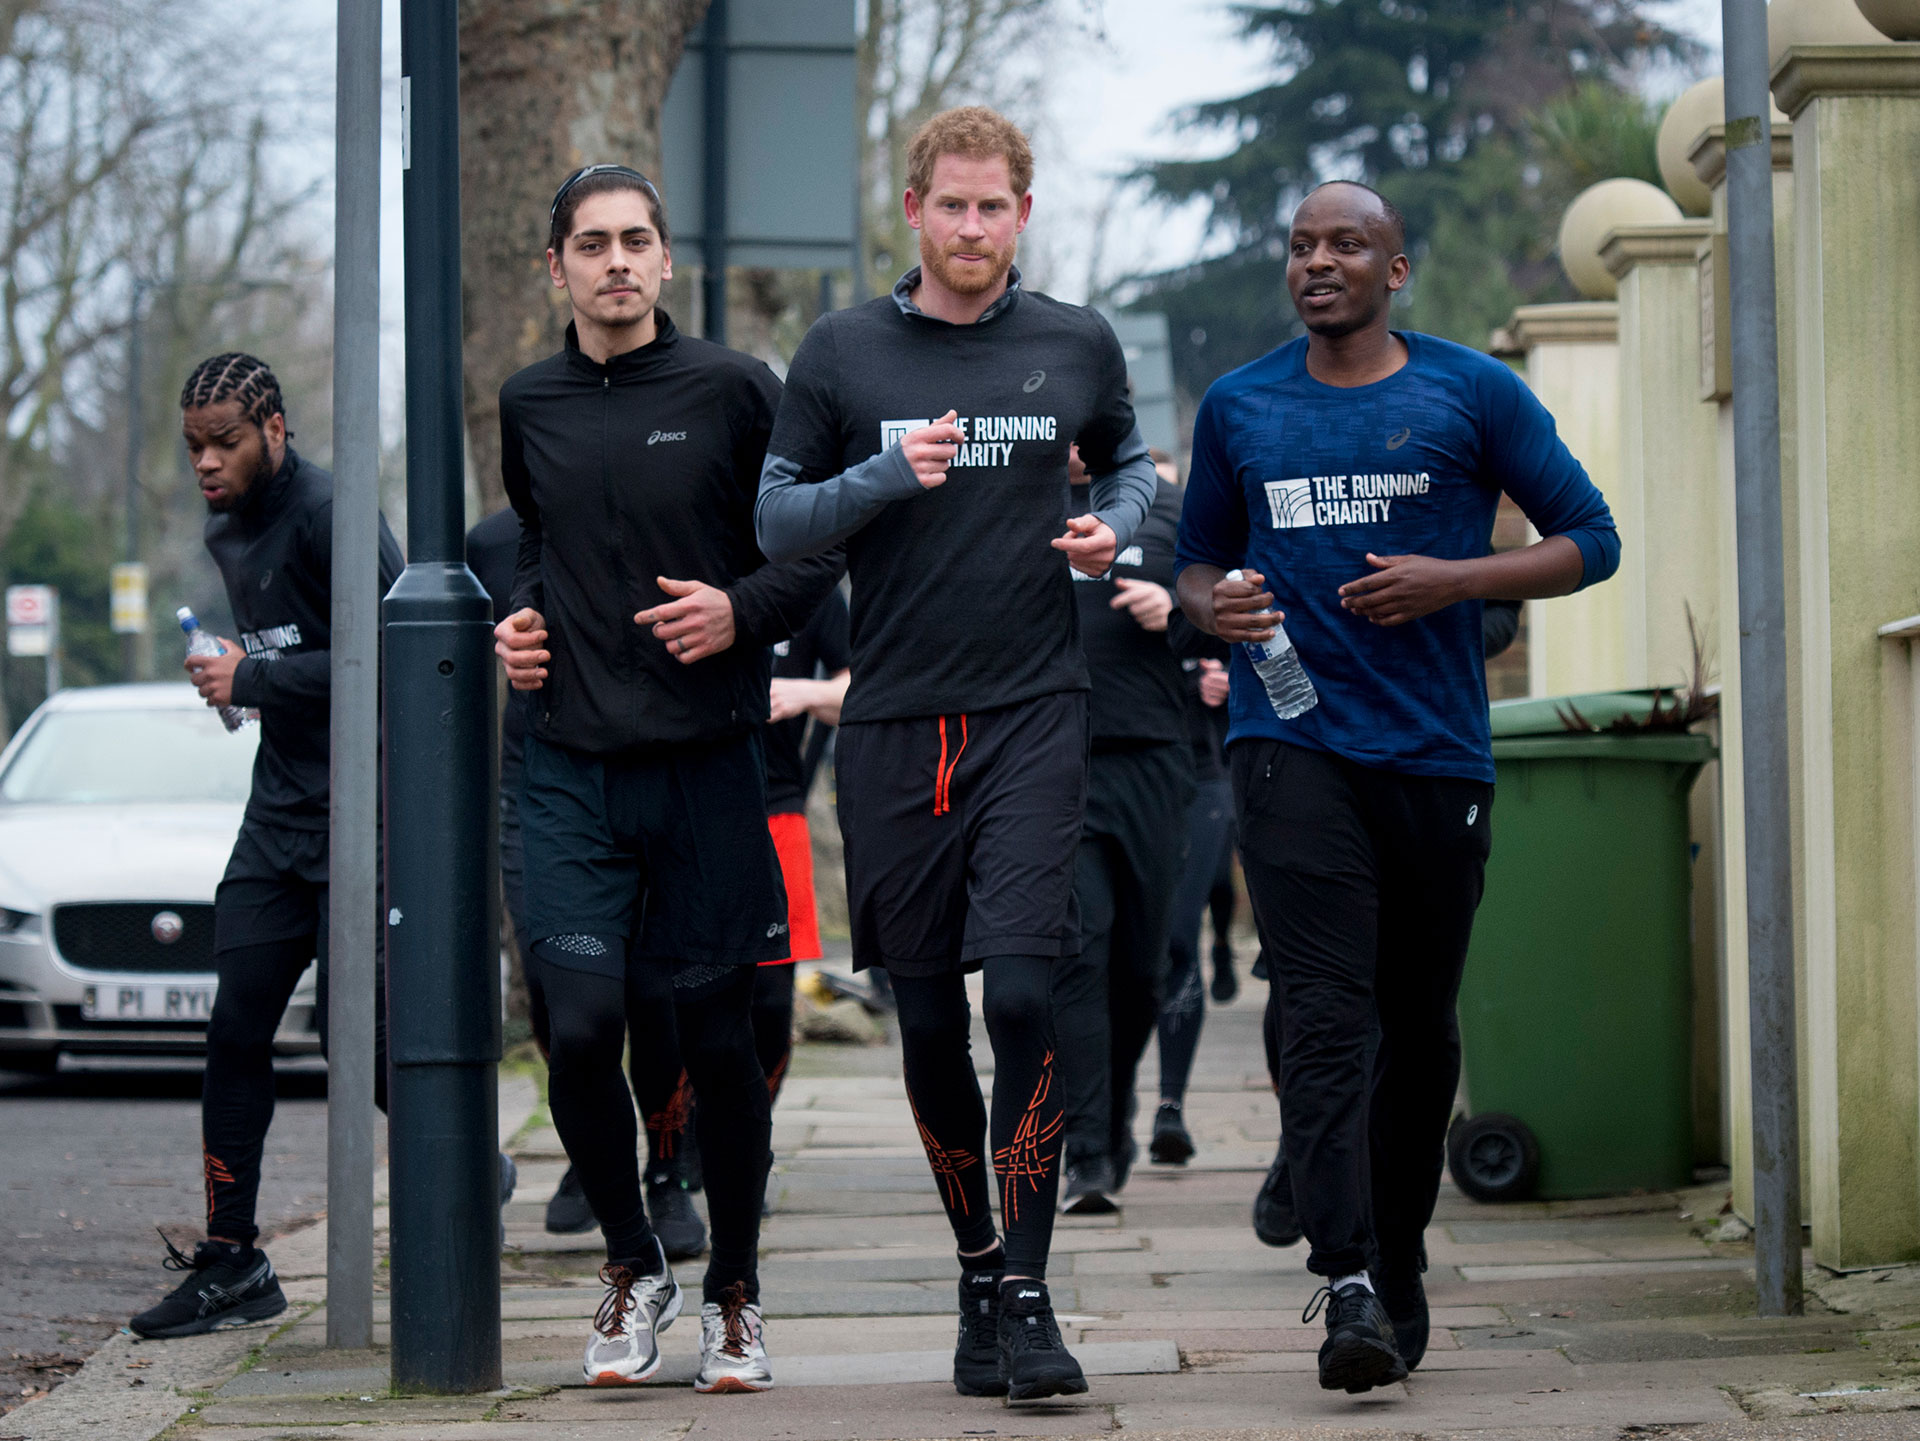 Prince Harry goes on run to support charity for homeless youths